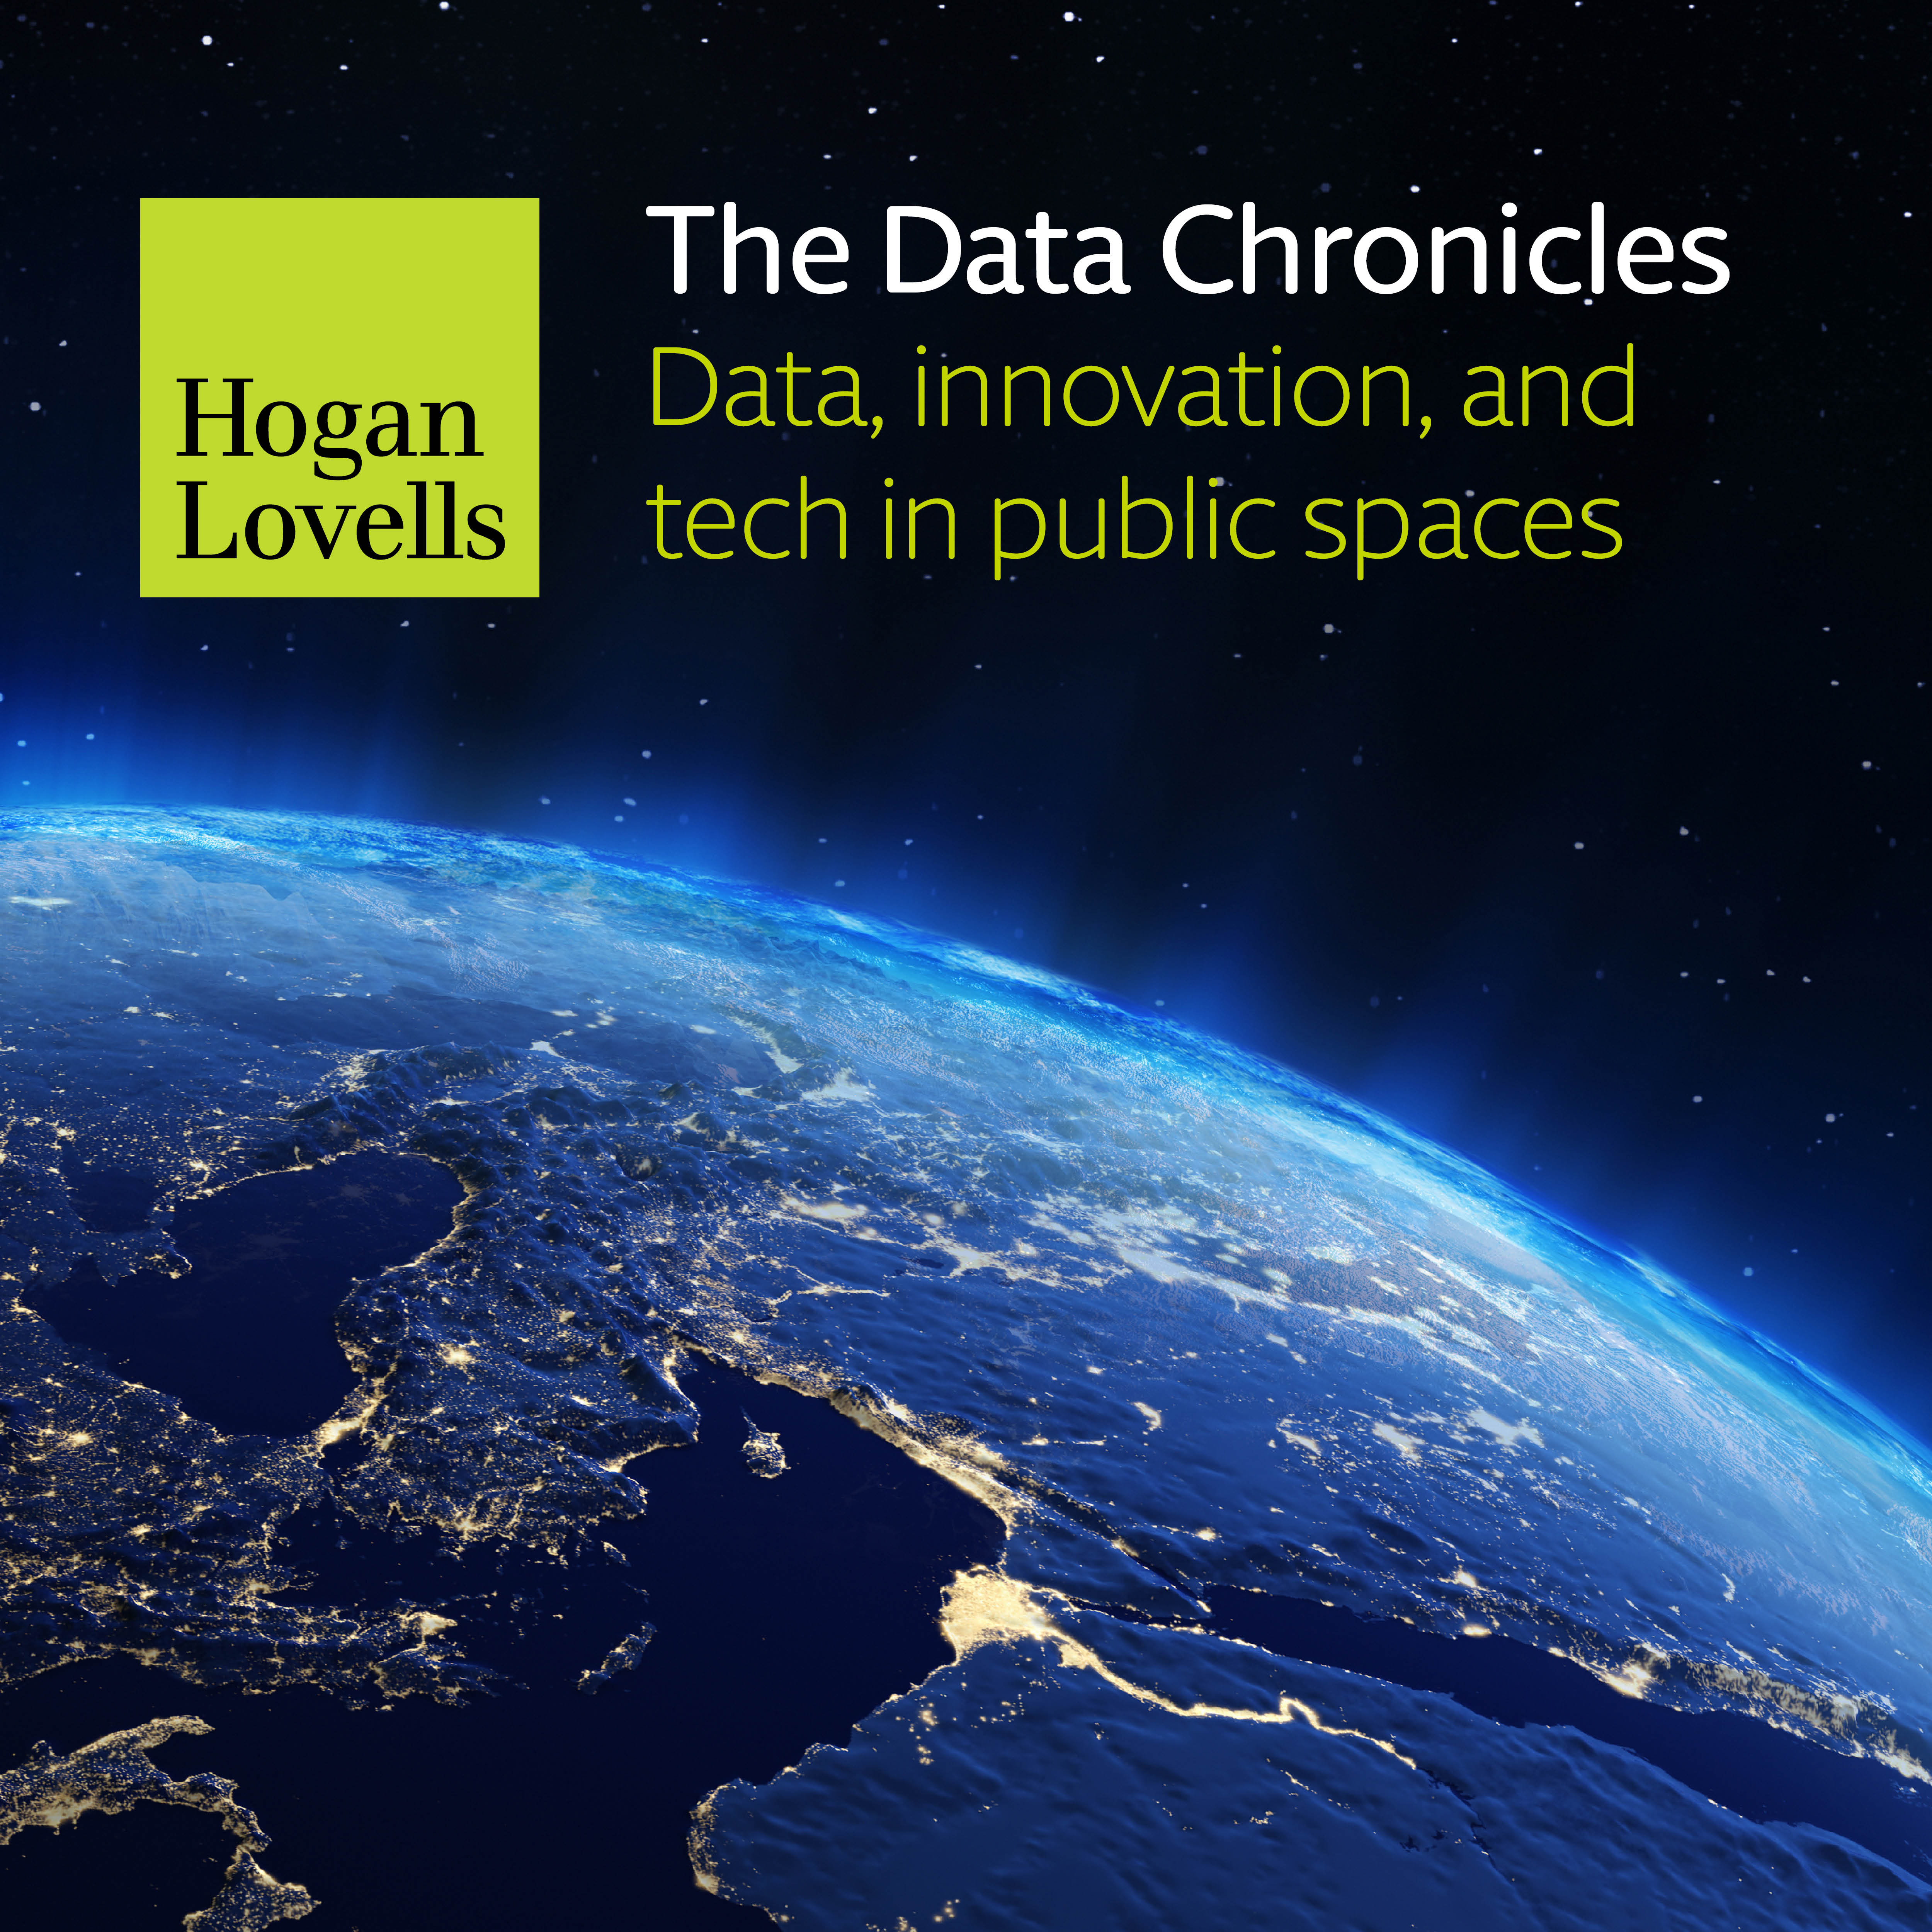 The Data Chronicles_The Underline